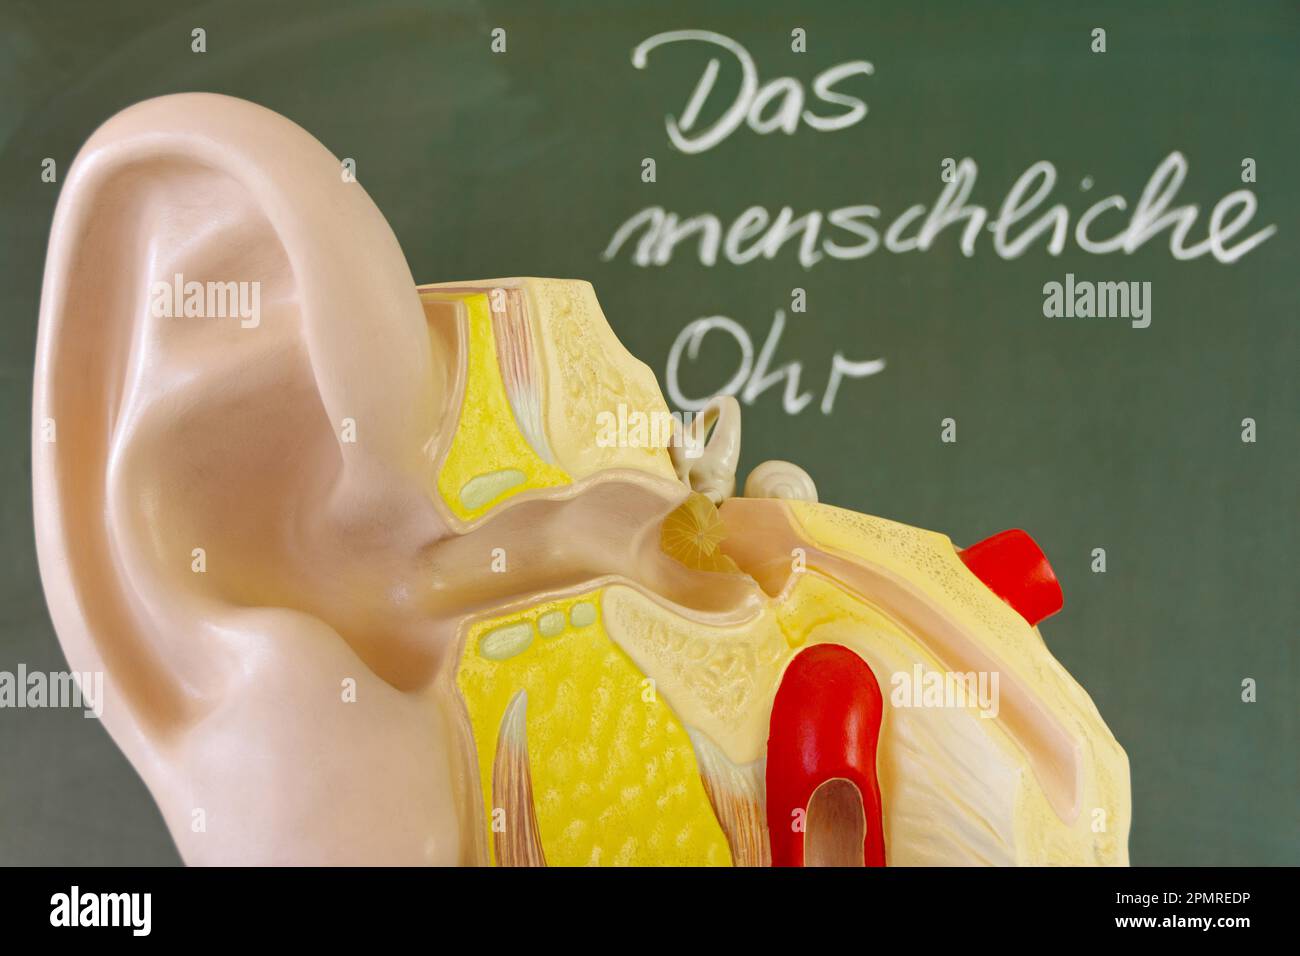 Sectional view of a human ear in front of a blackboard with the German text Stock Photo